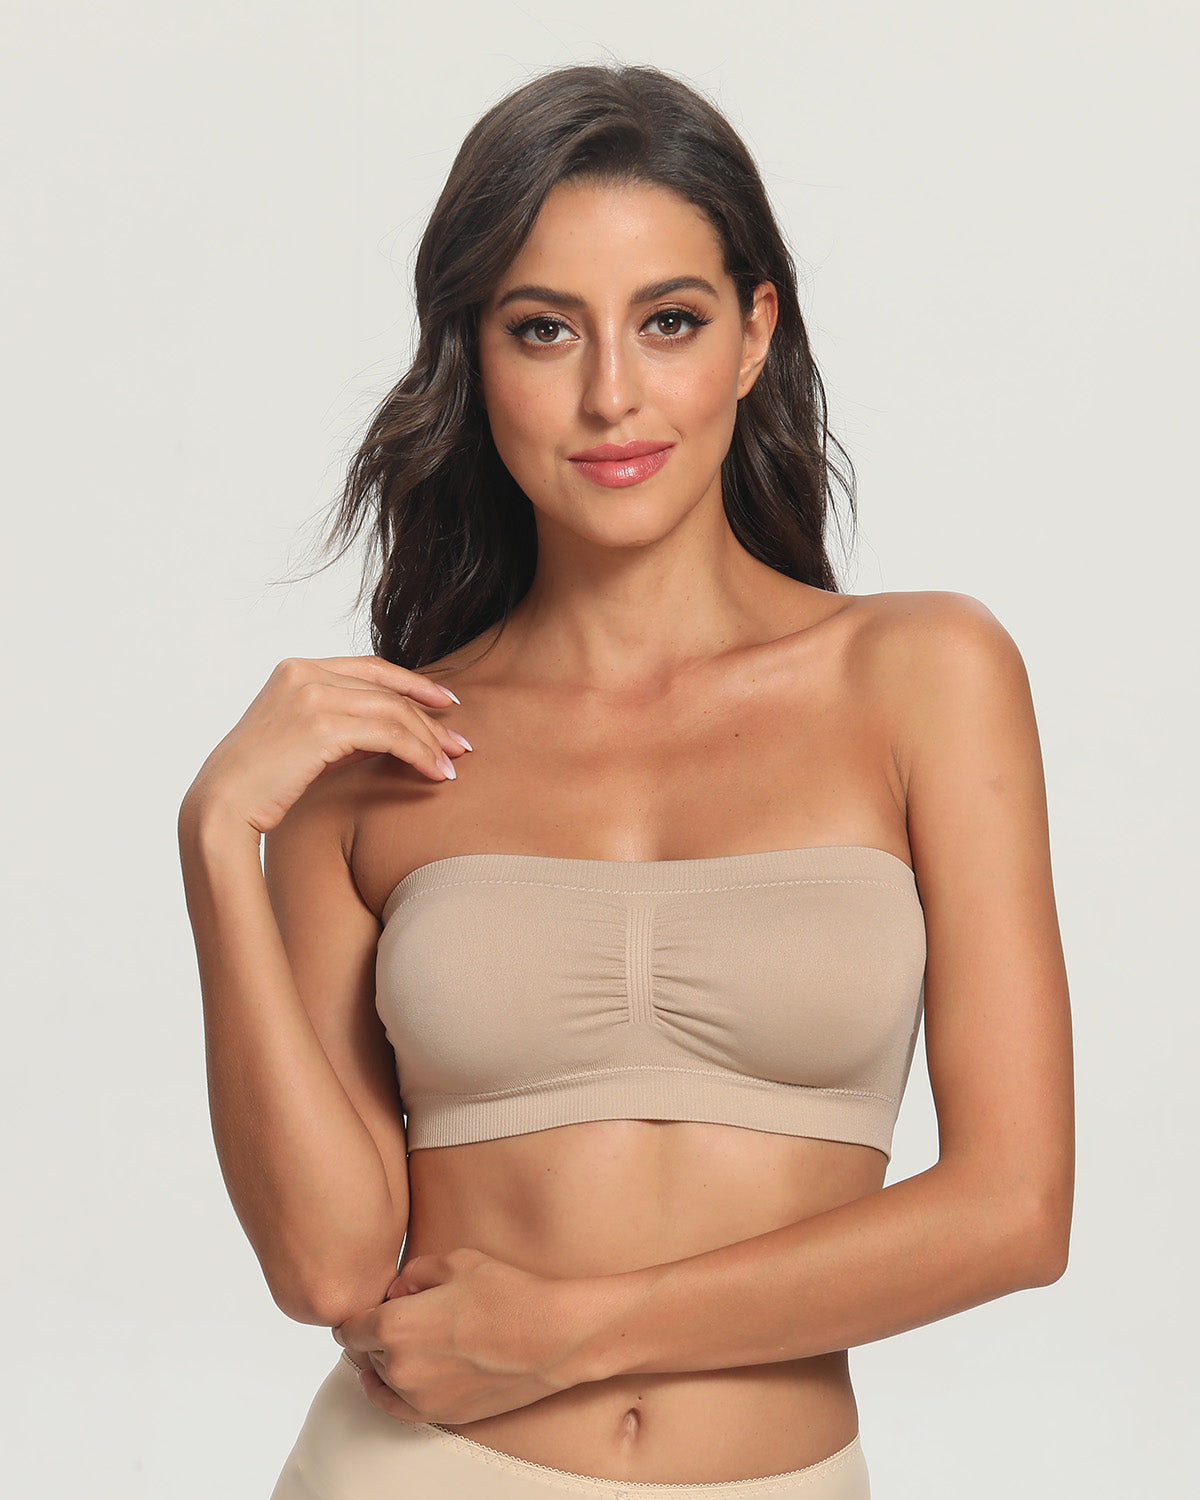 Top 6 Bras to Push Up Your Saggy Breasts